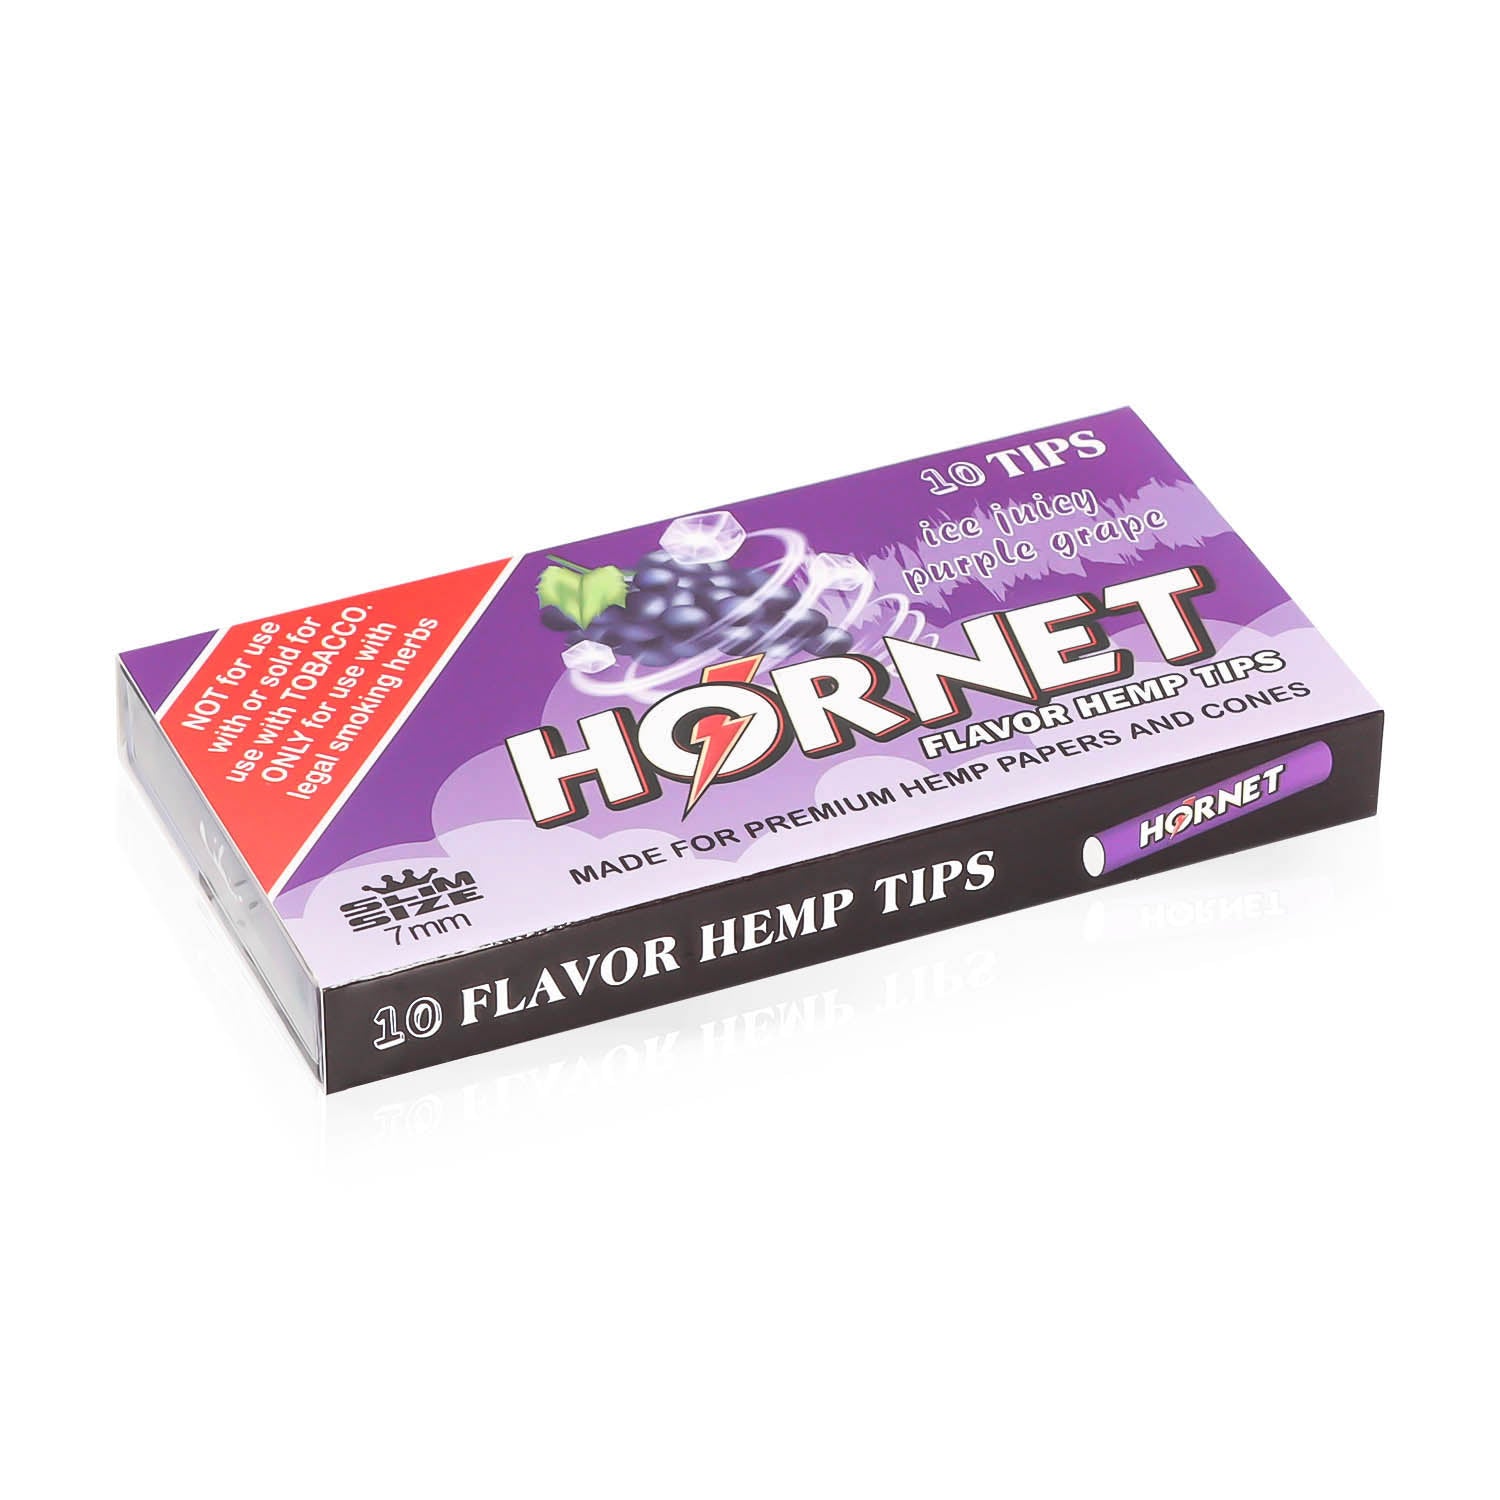 HORNET Grape Flavors Filter Tips with Flavored Pop, 7 mm Filter Tips, 10 Tips / Pack 24 Packs / Box